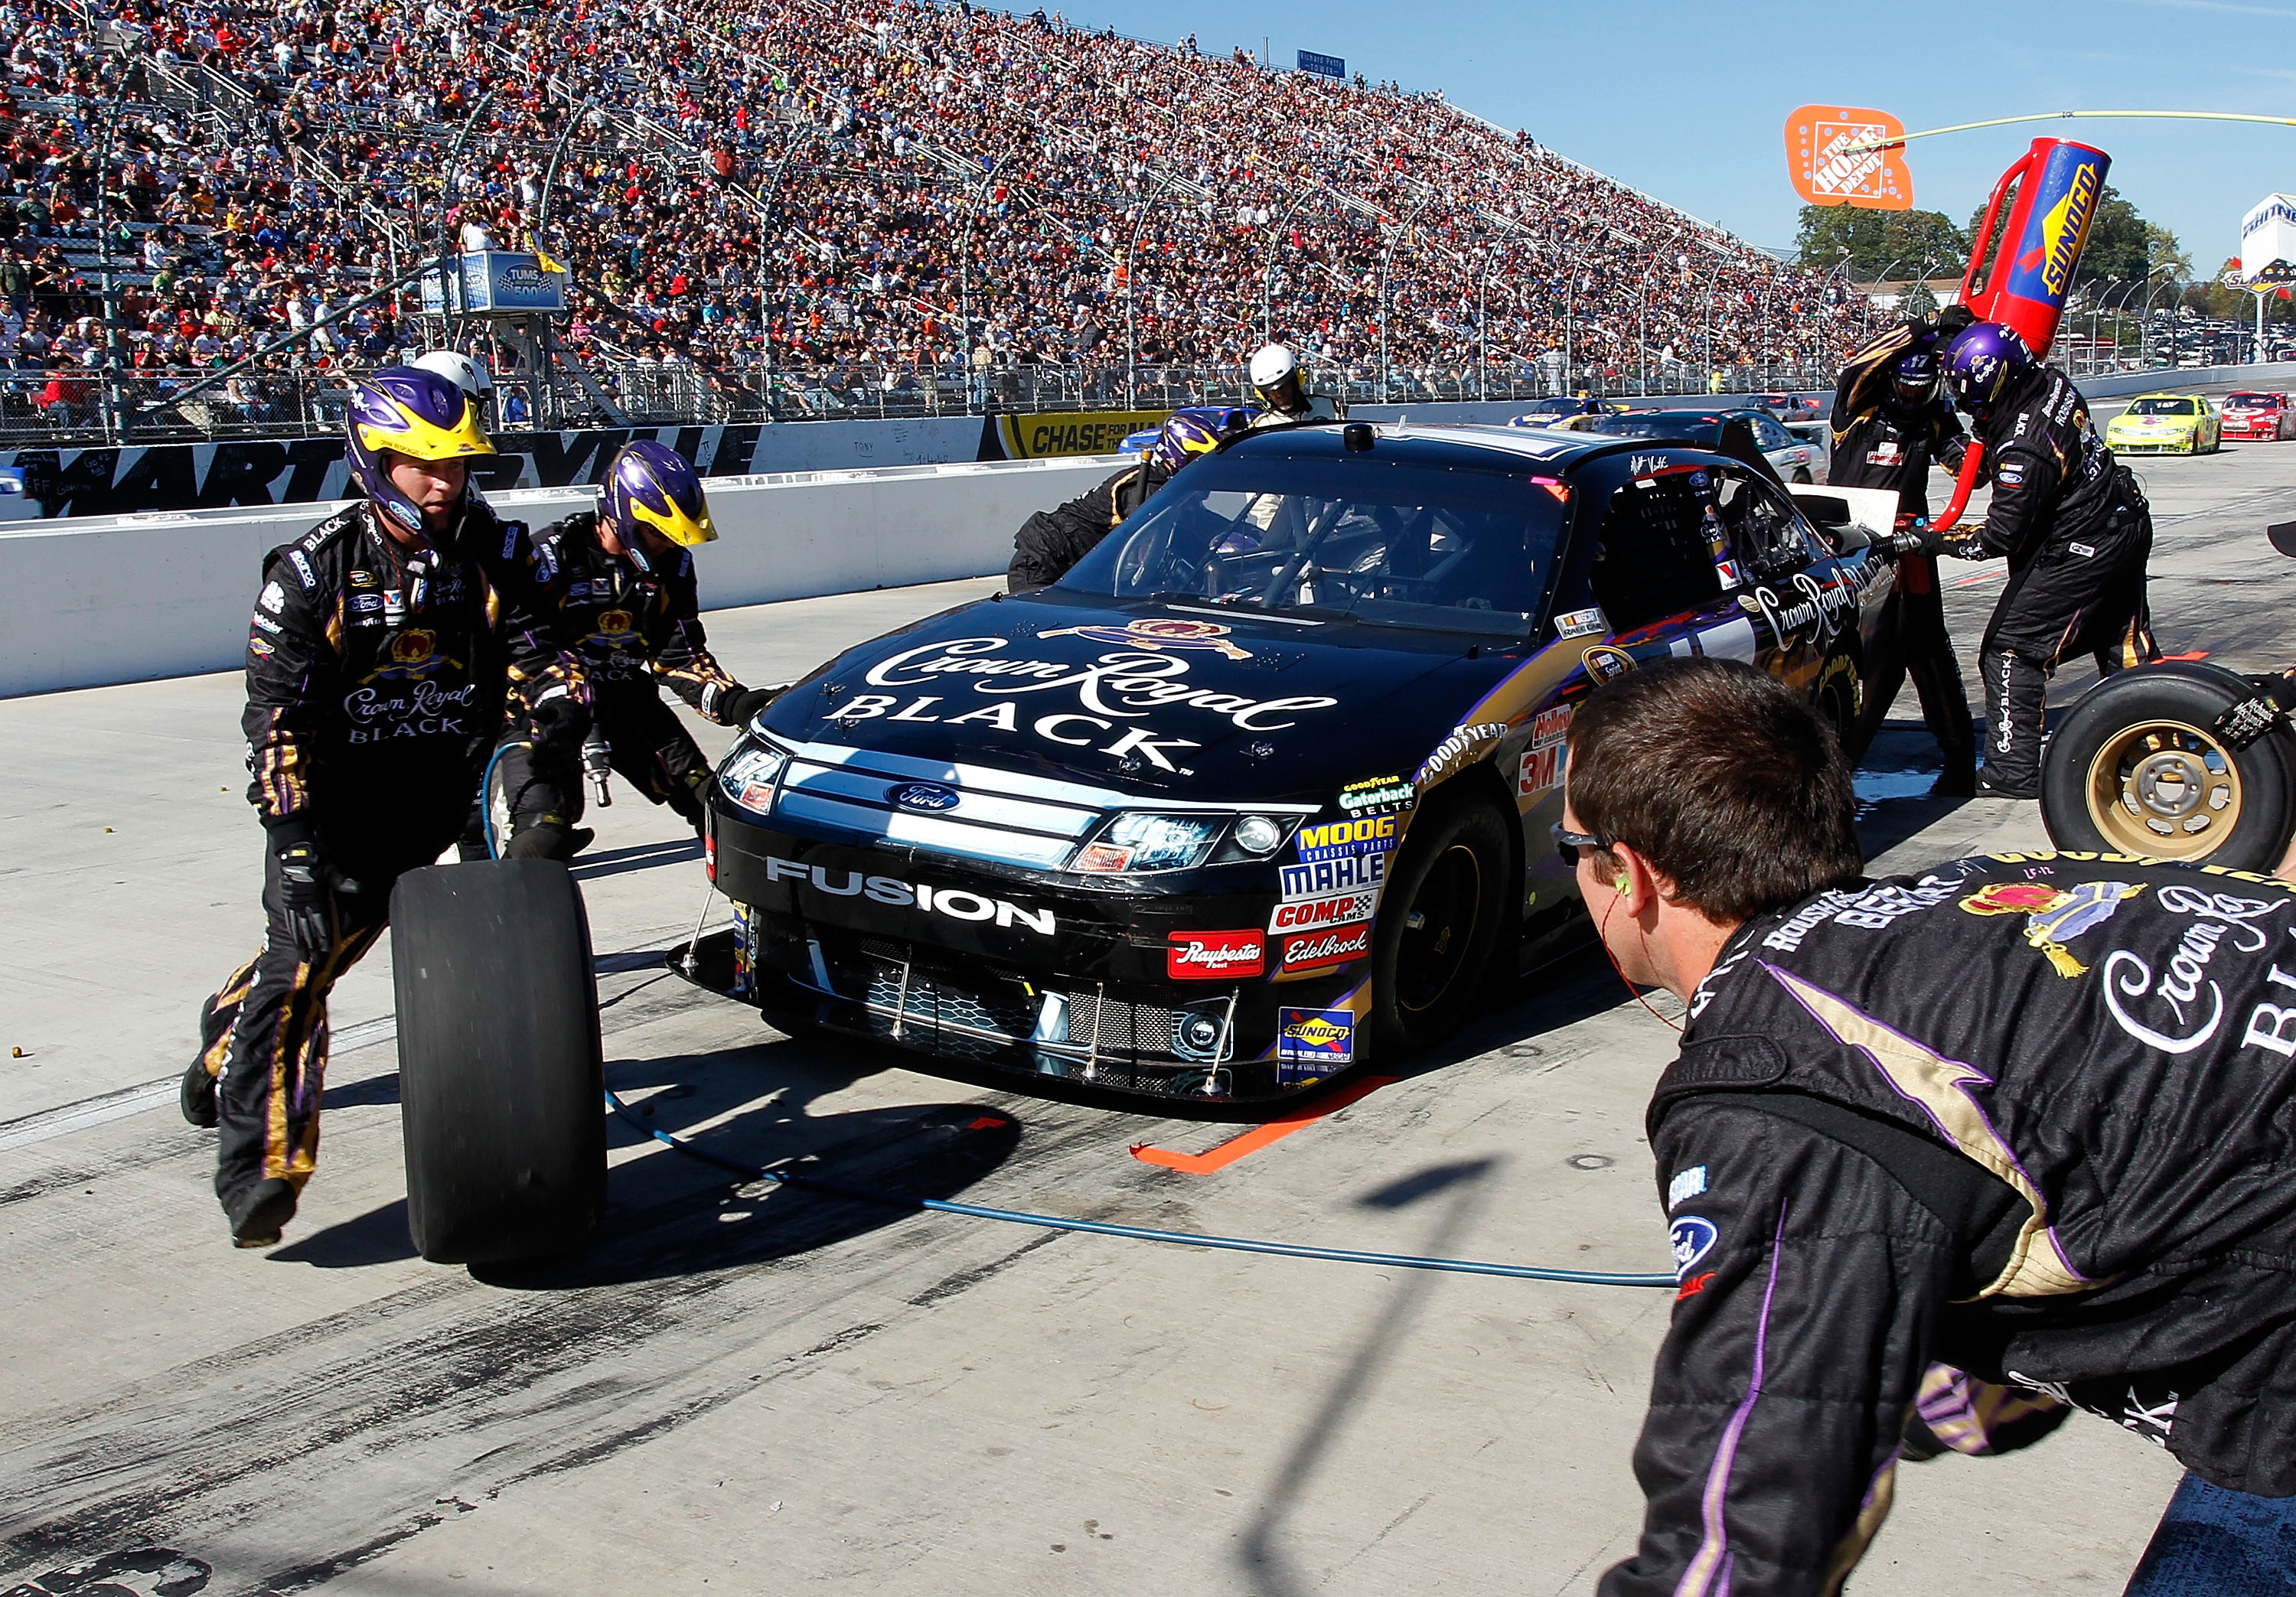 MARTINSVILLE, VA - OCTOBER 24: Matt Kenseth, driver of the #17 Crown Royal Black Ford, pits during the NASCAR Sprint Cup Series TUMS Fast Relief 500 at Martinsville Speedway on October 24, 2010 in Martinsville, Virginia.  (Photo by Geoff Burke/Getty Image